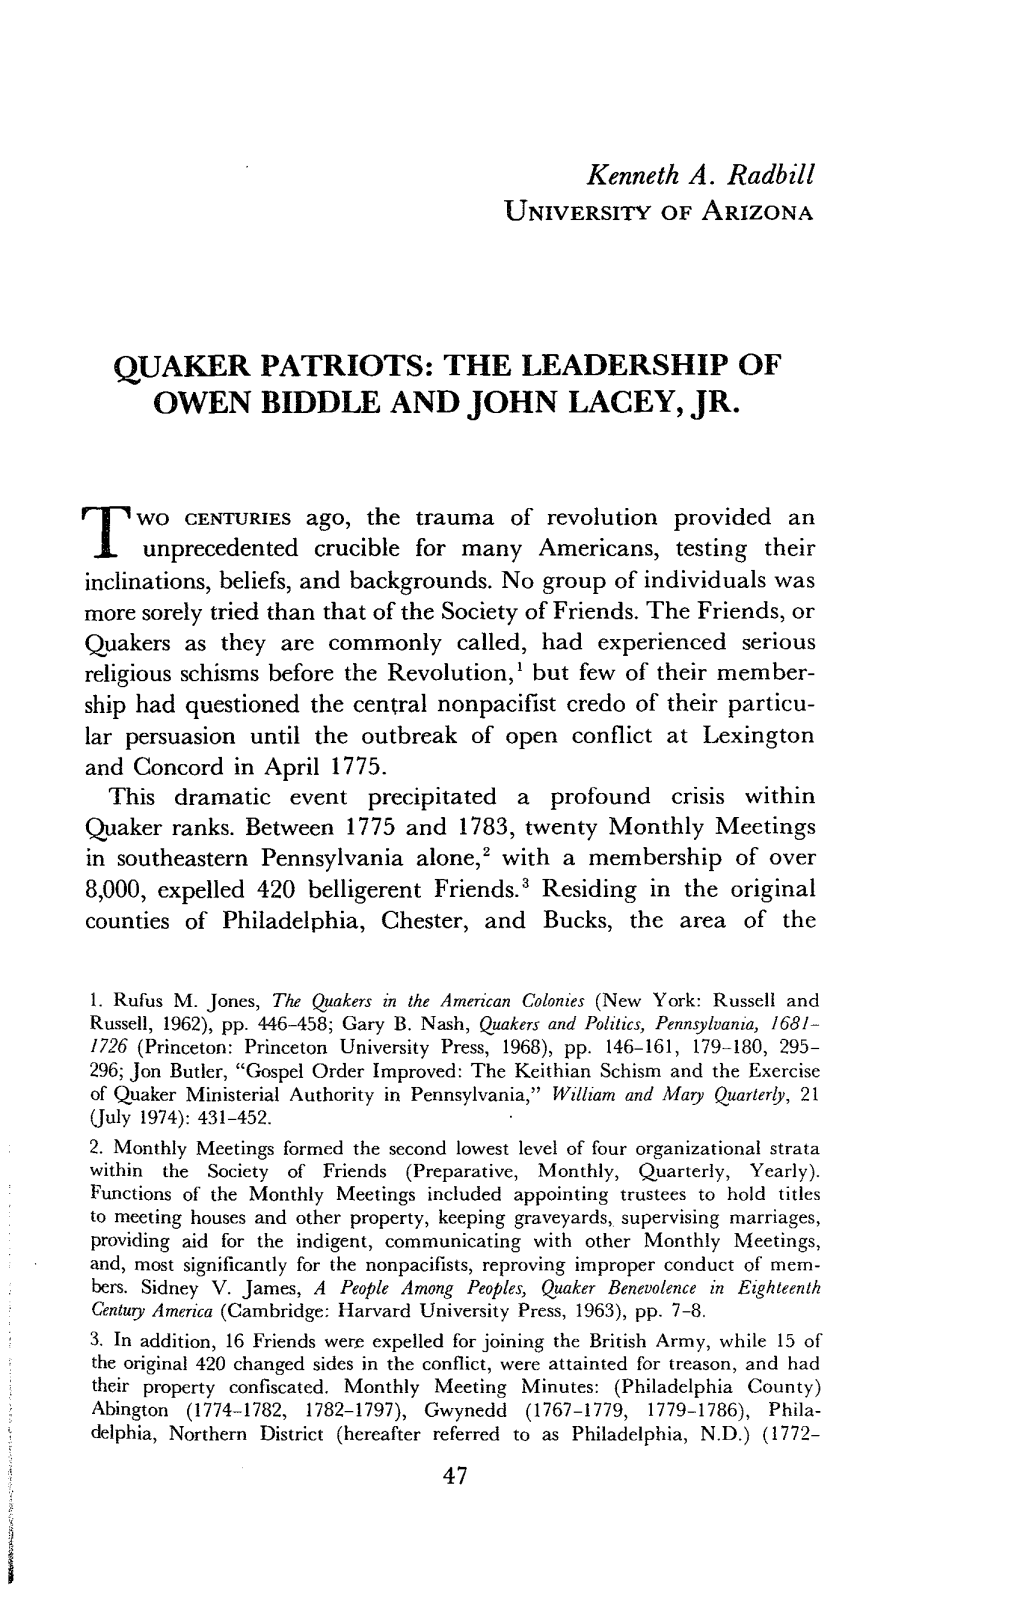 Quaker Patriots: the Leadership of Owen Biddle and John Lacey, Jr